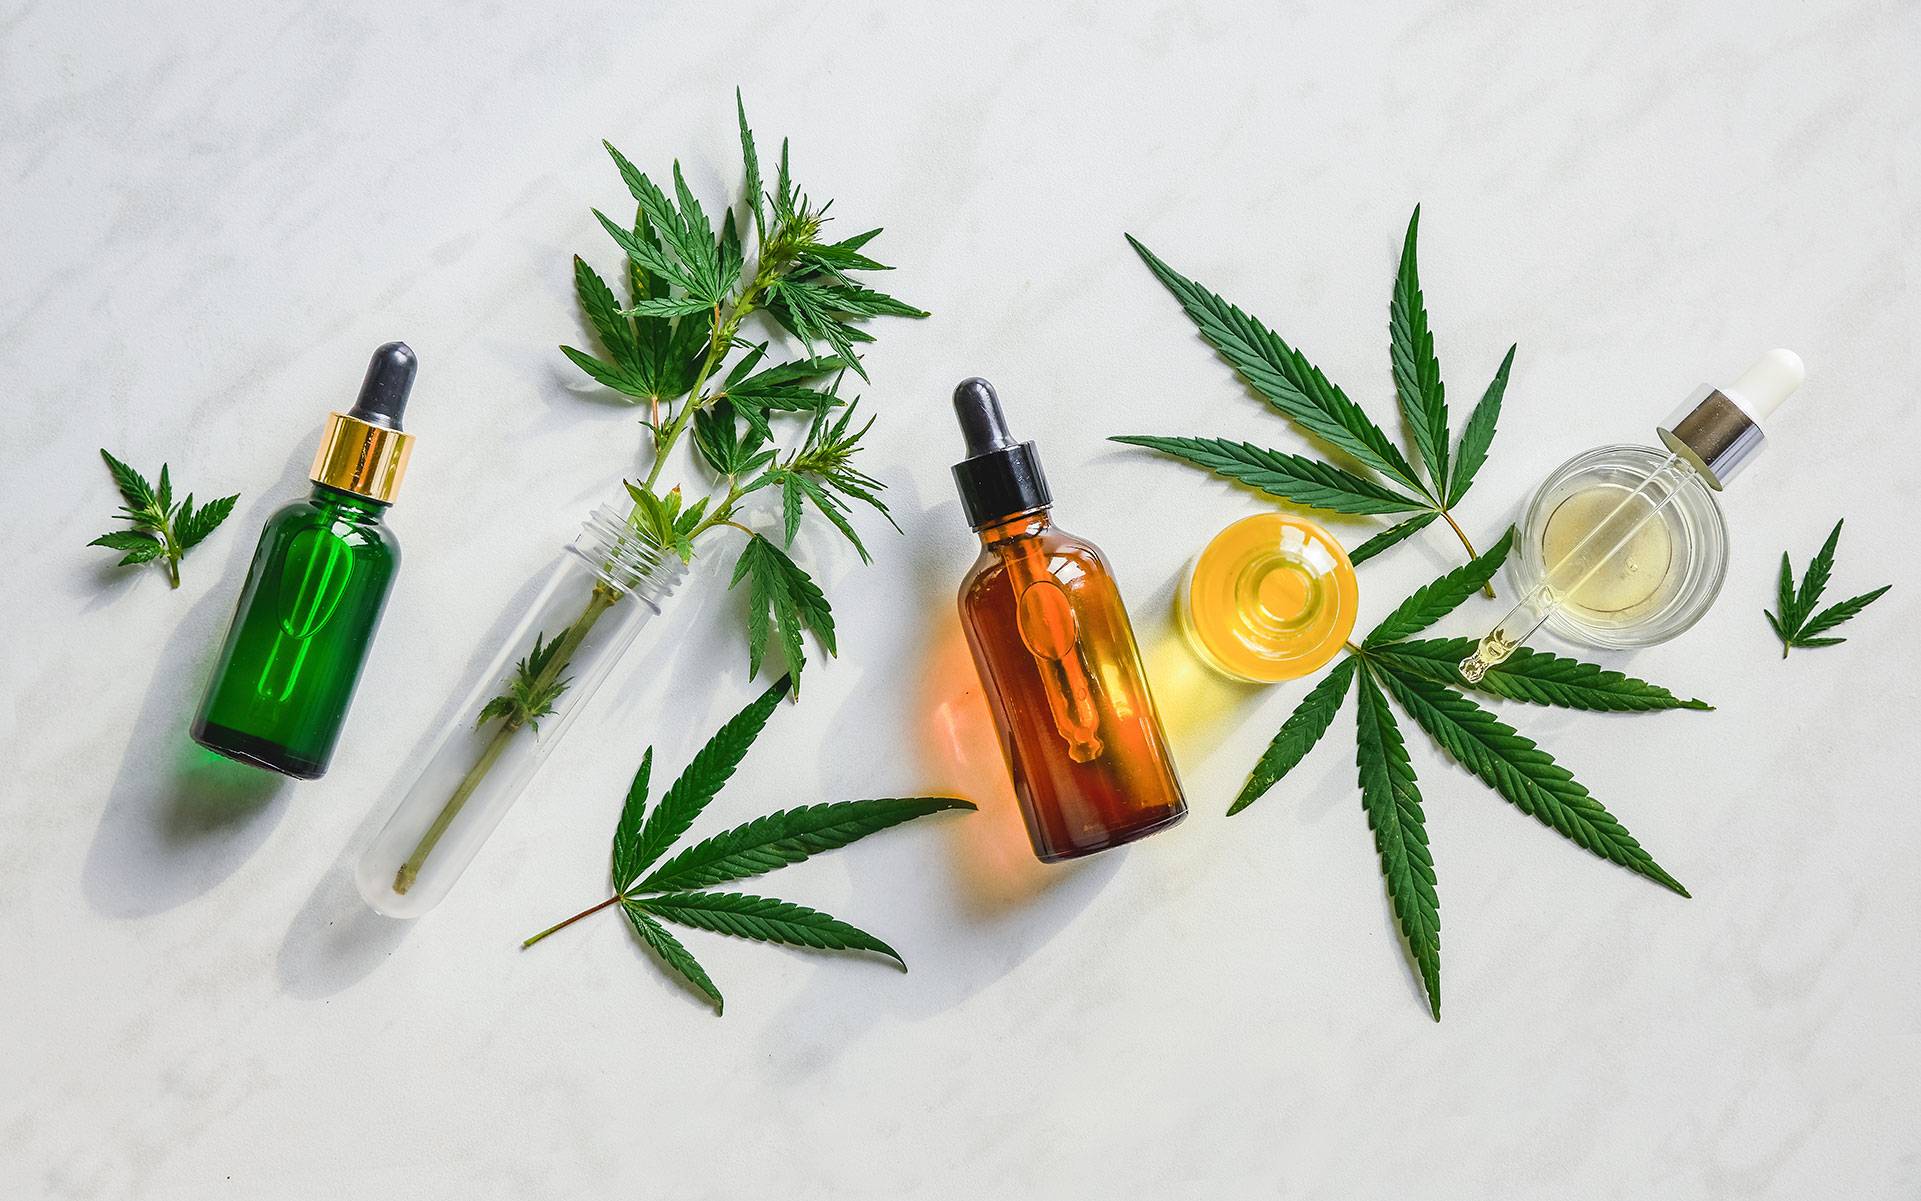 Benefits and Uses of CBD